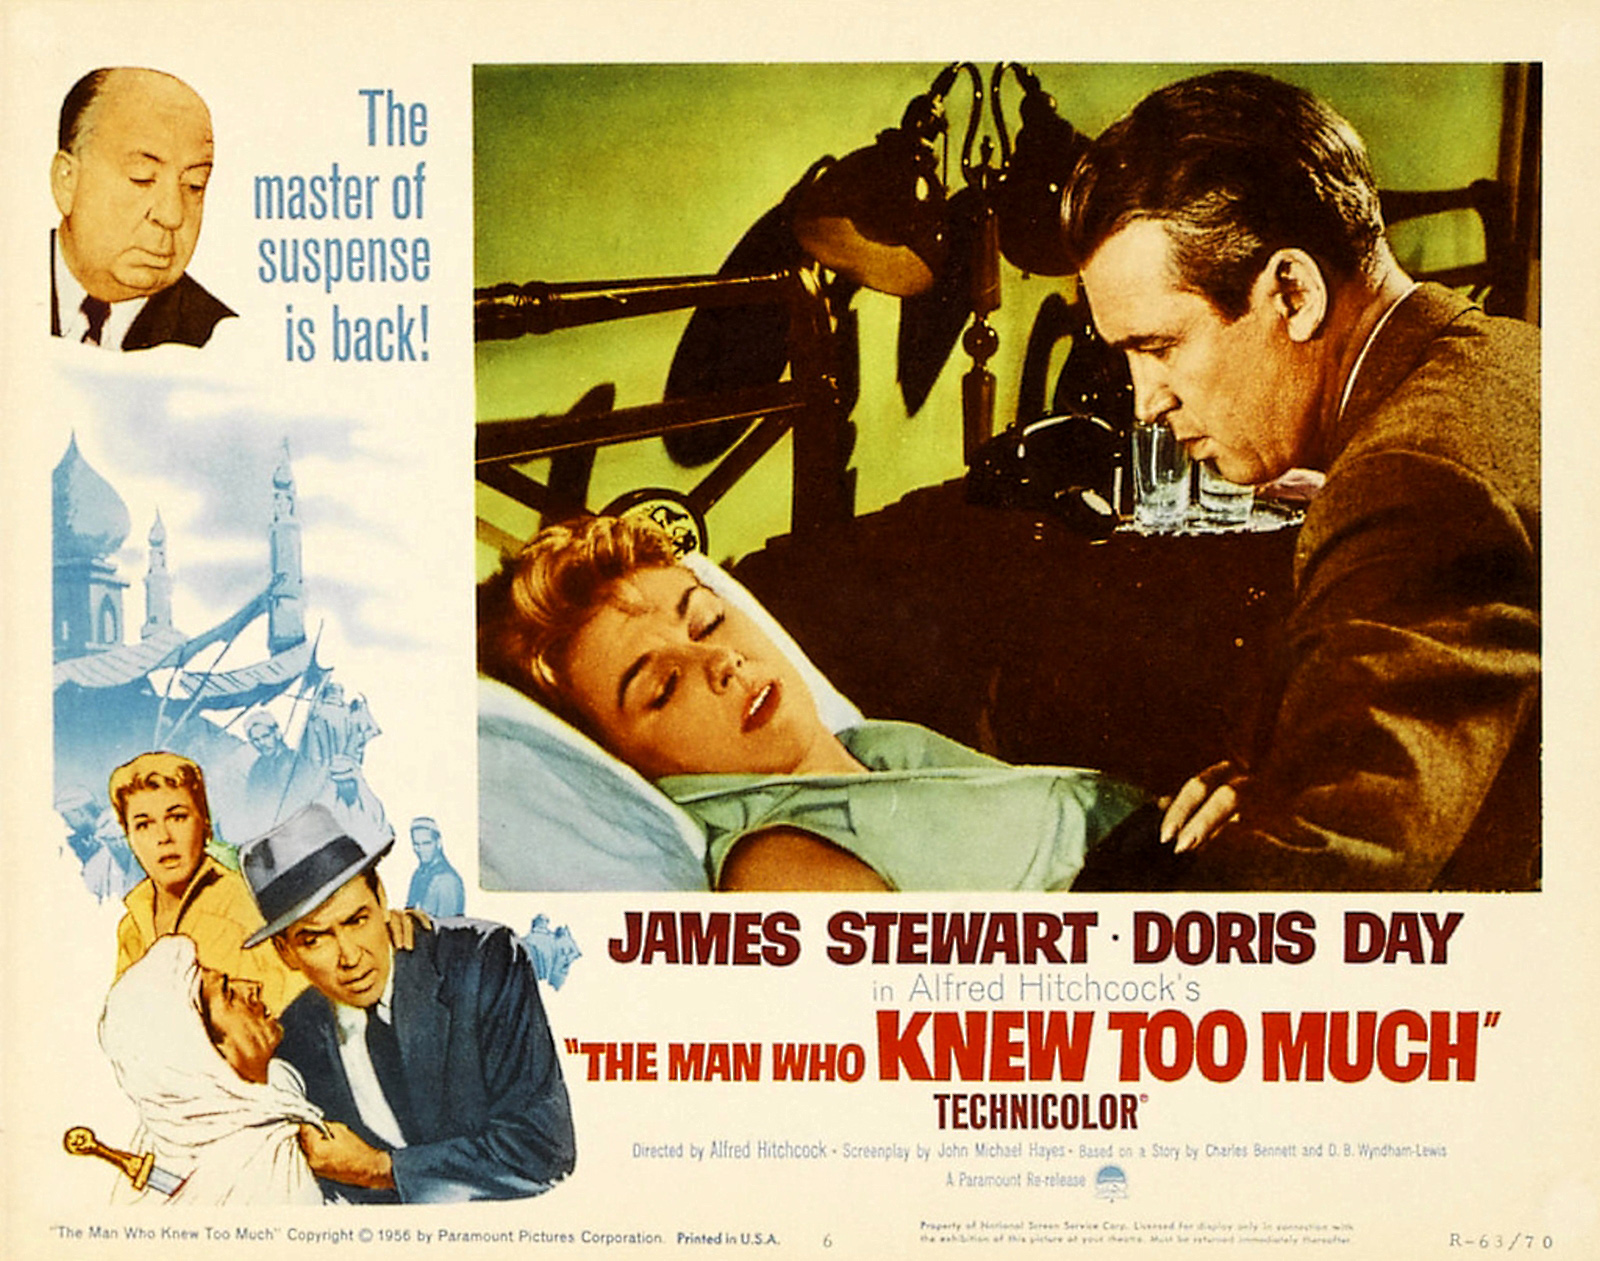 The Man Who Knew Too Much [1956]